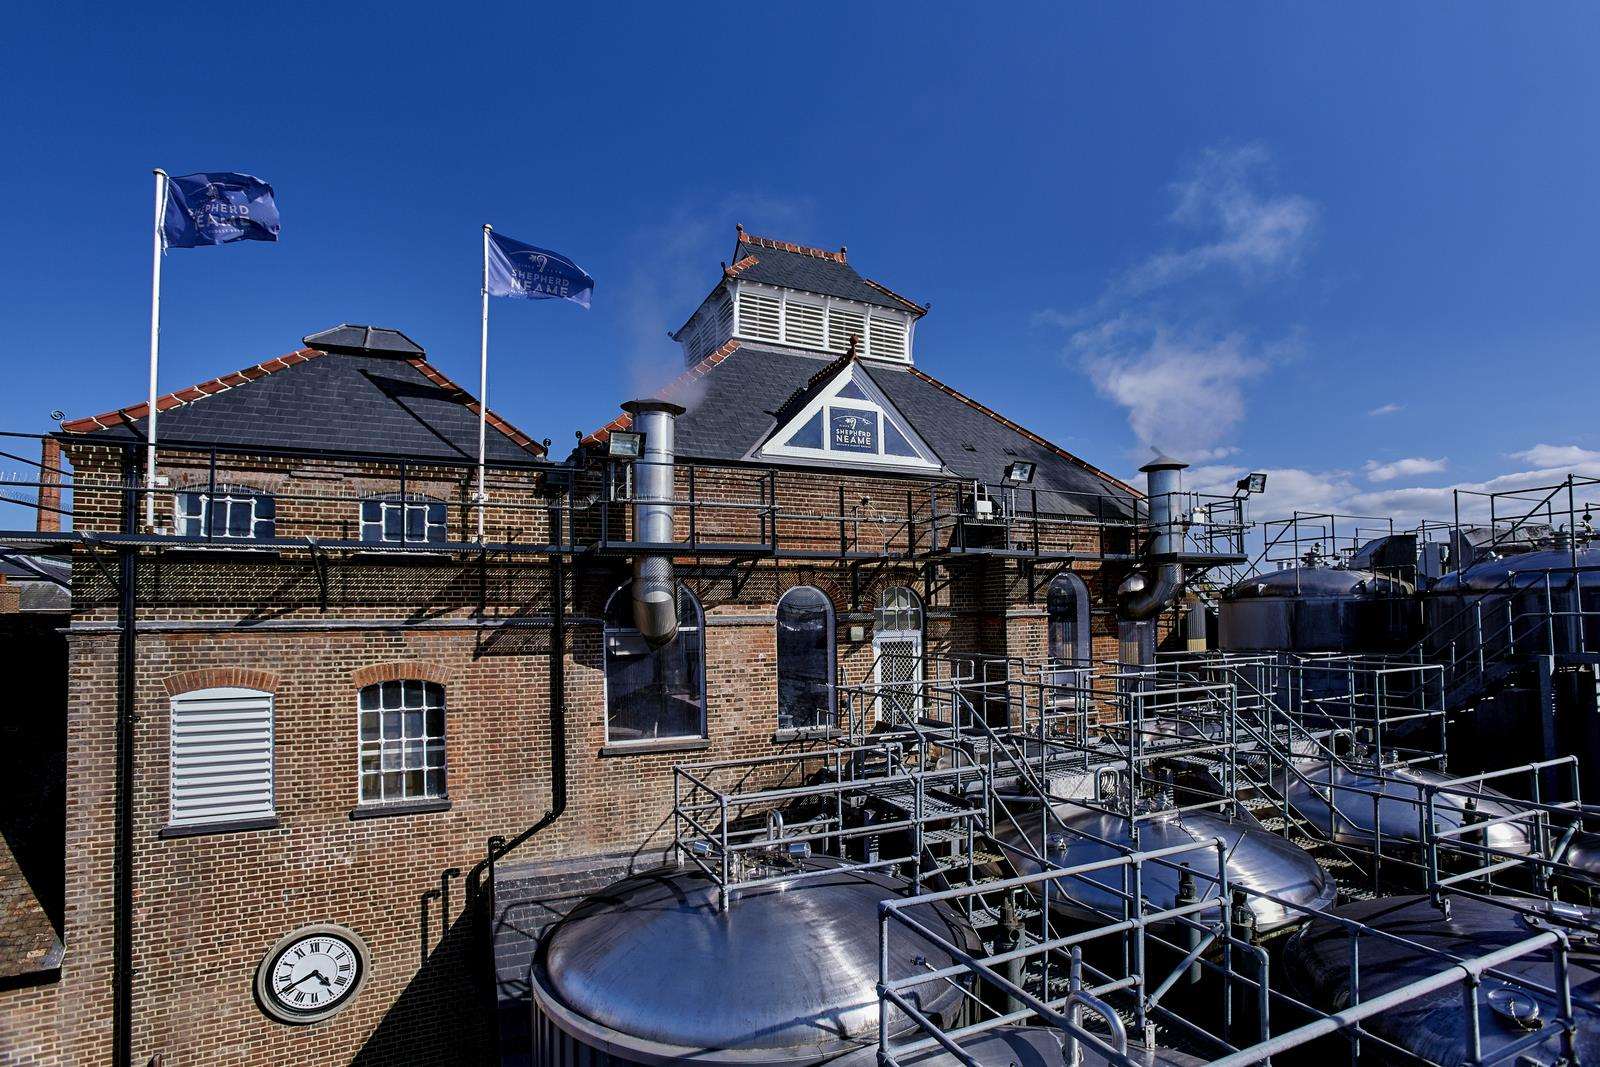 Shepherd Neame is the country's oldest brewery